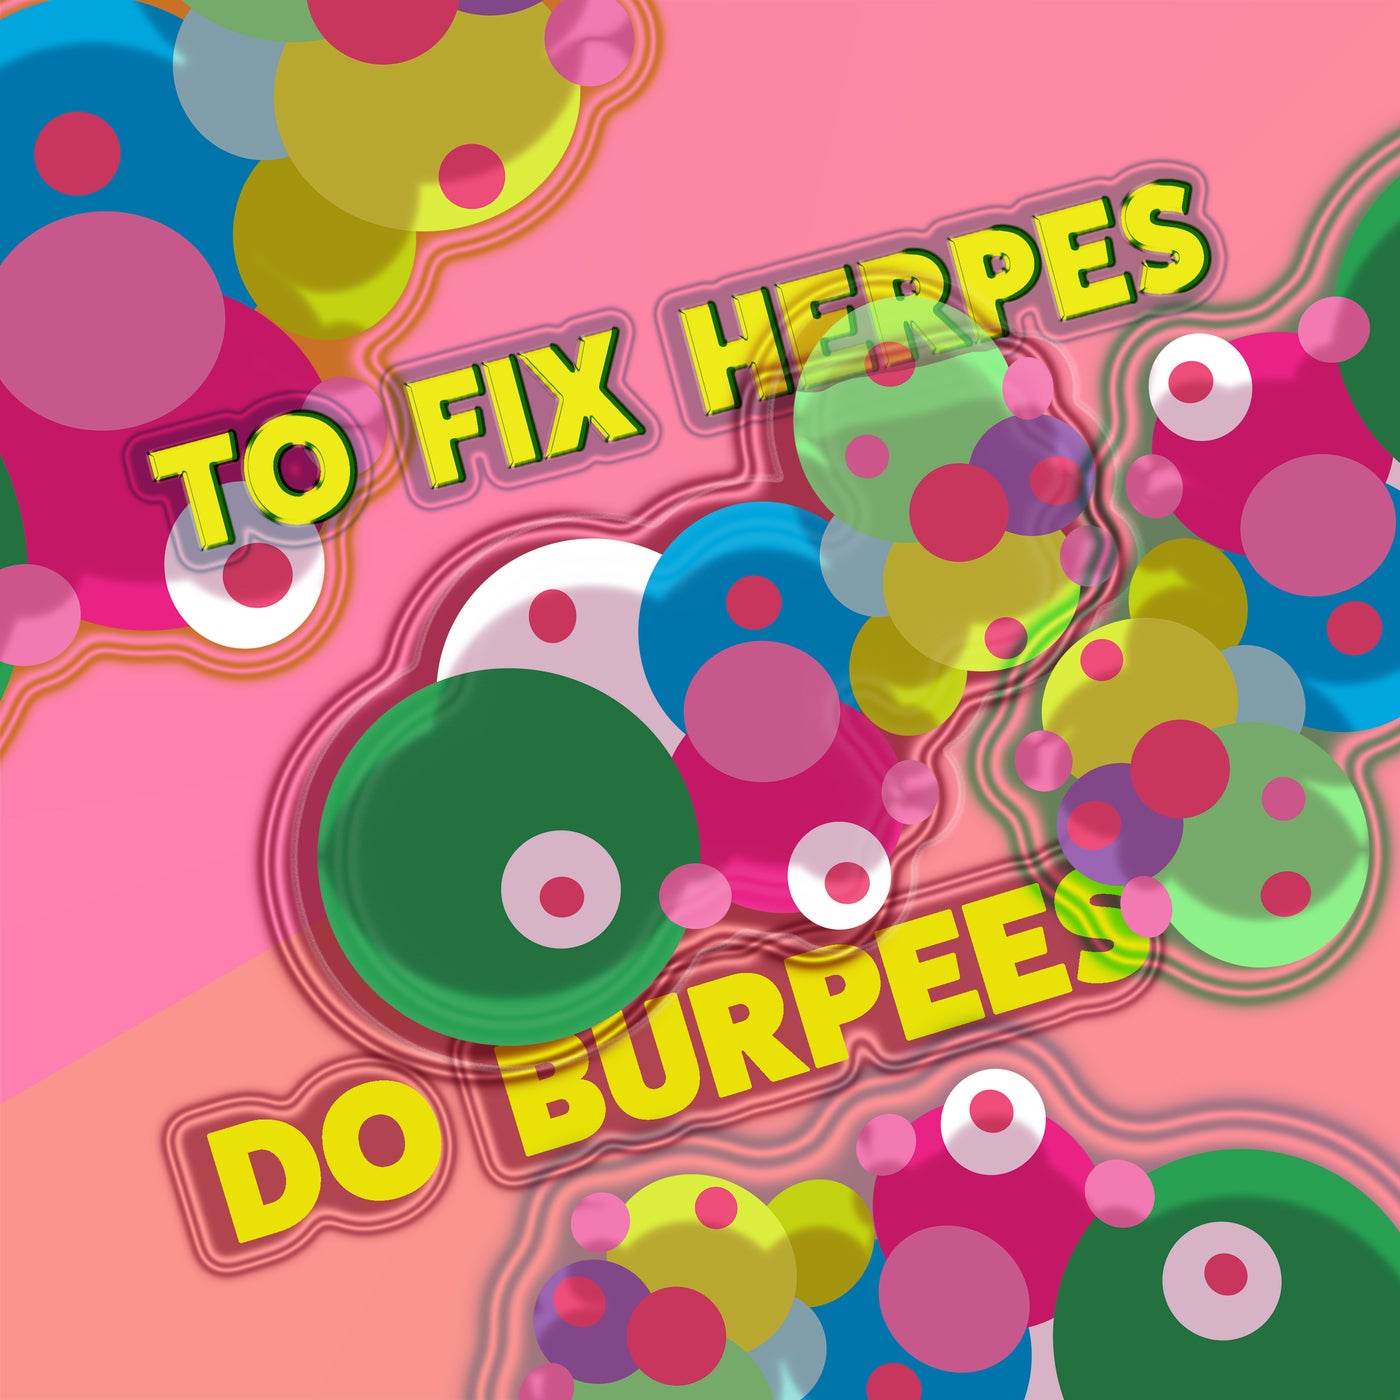 To Fix Herpes Do Burpees